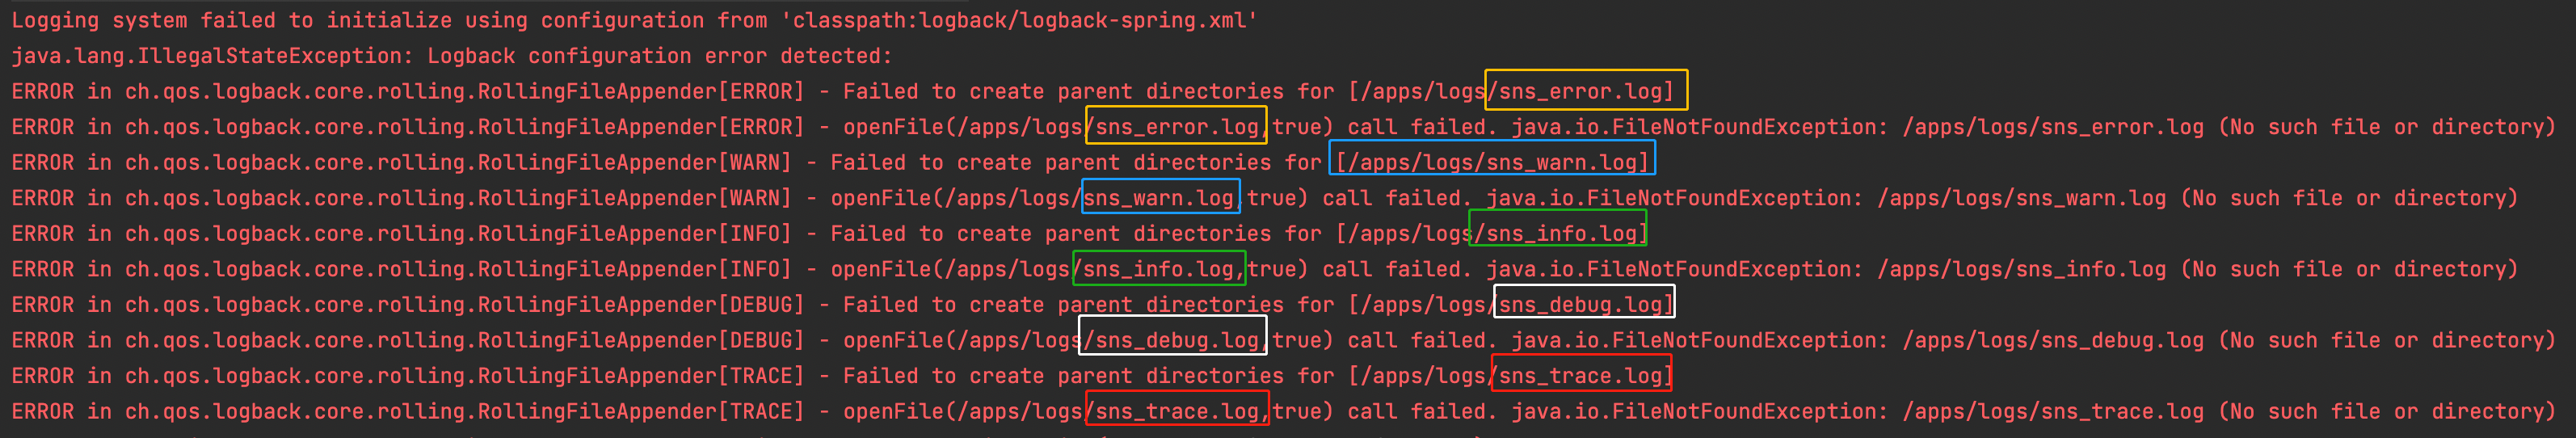 Logging system failed to initialize using configuration from ‘classpathlogbacklogback-spring.xml‘